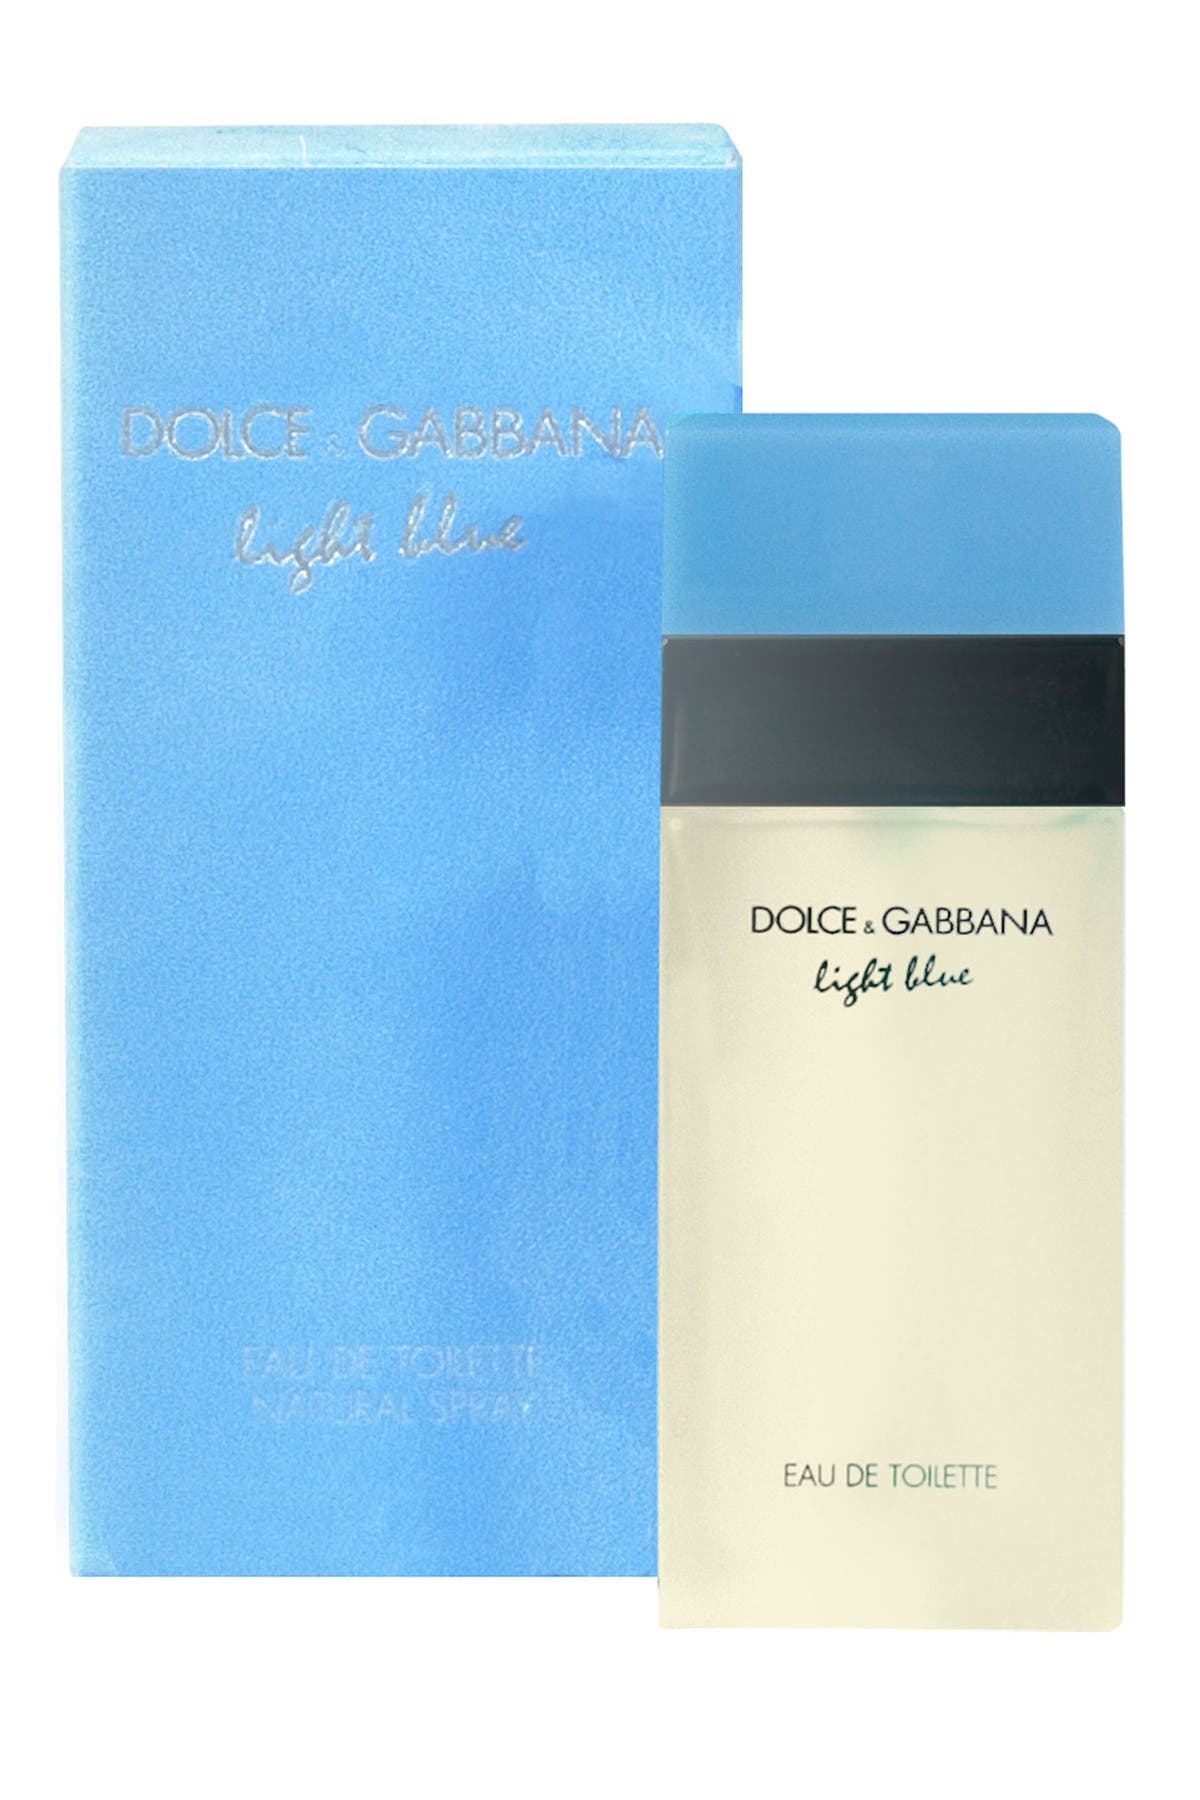 nordstrom rack dolce and gabbana